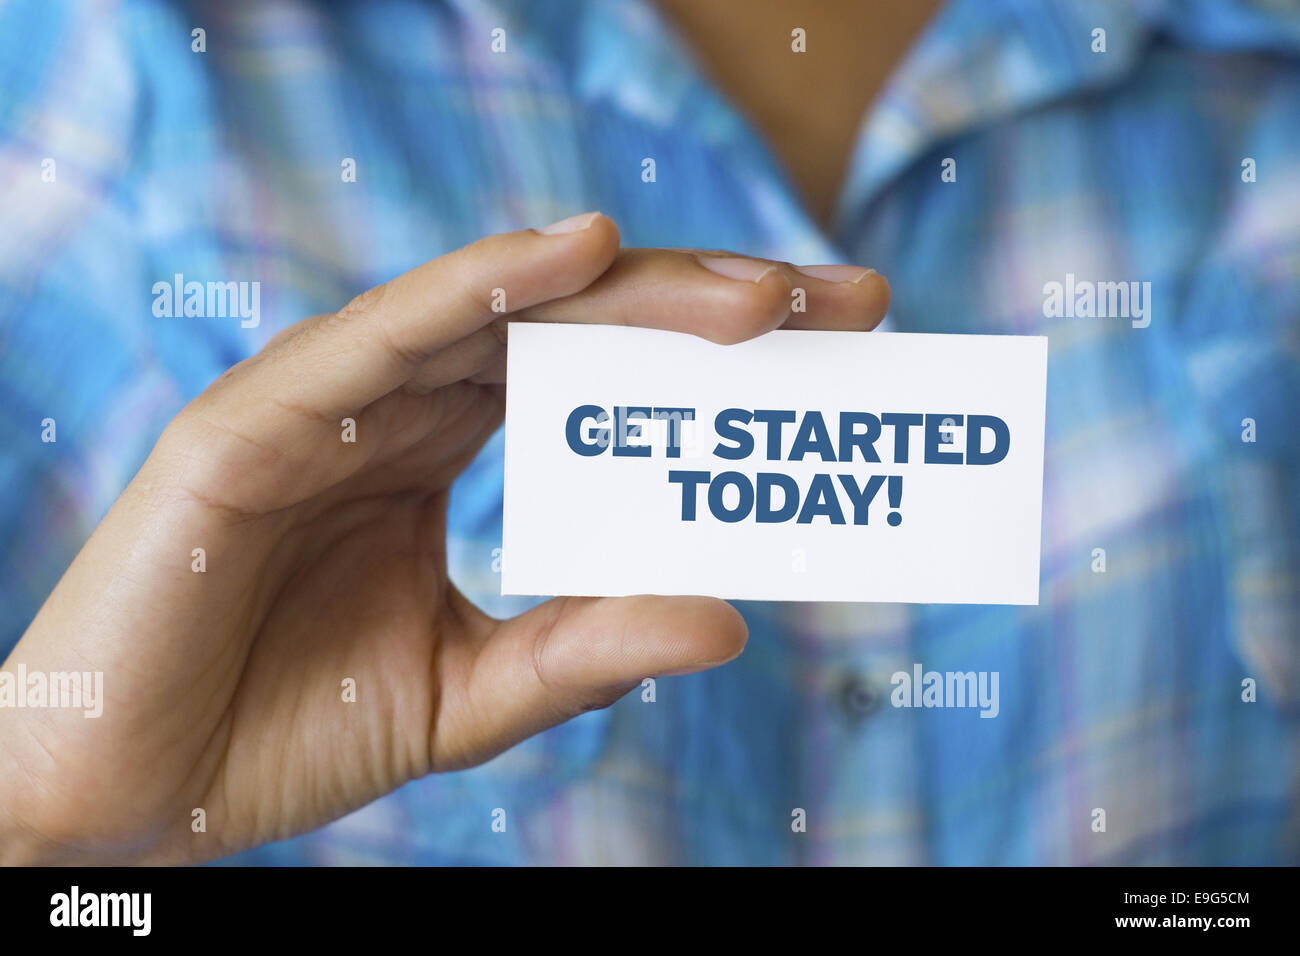 Get Started Today Stock Photo